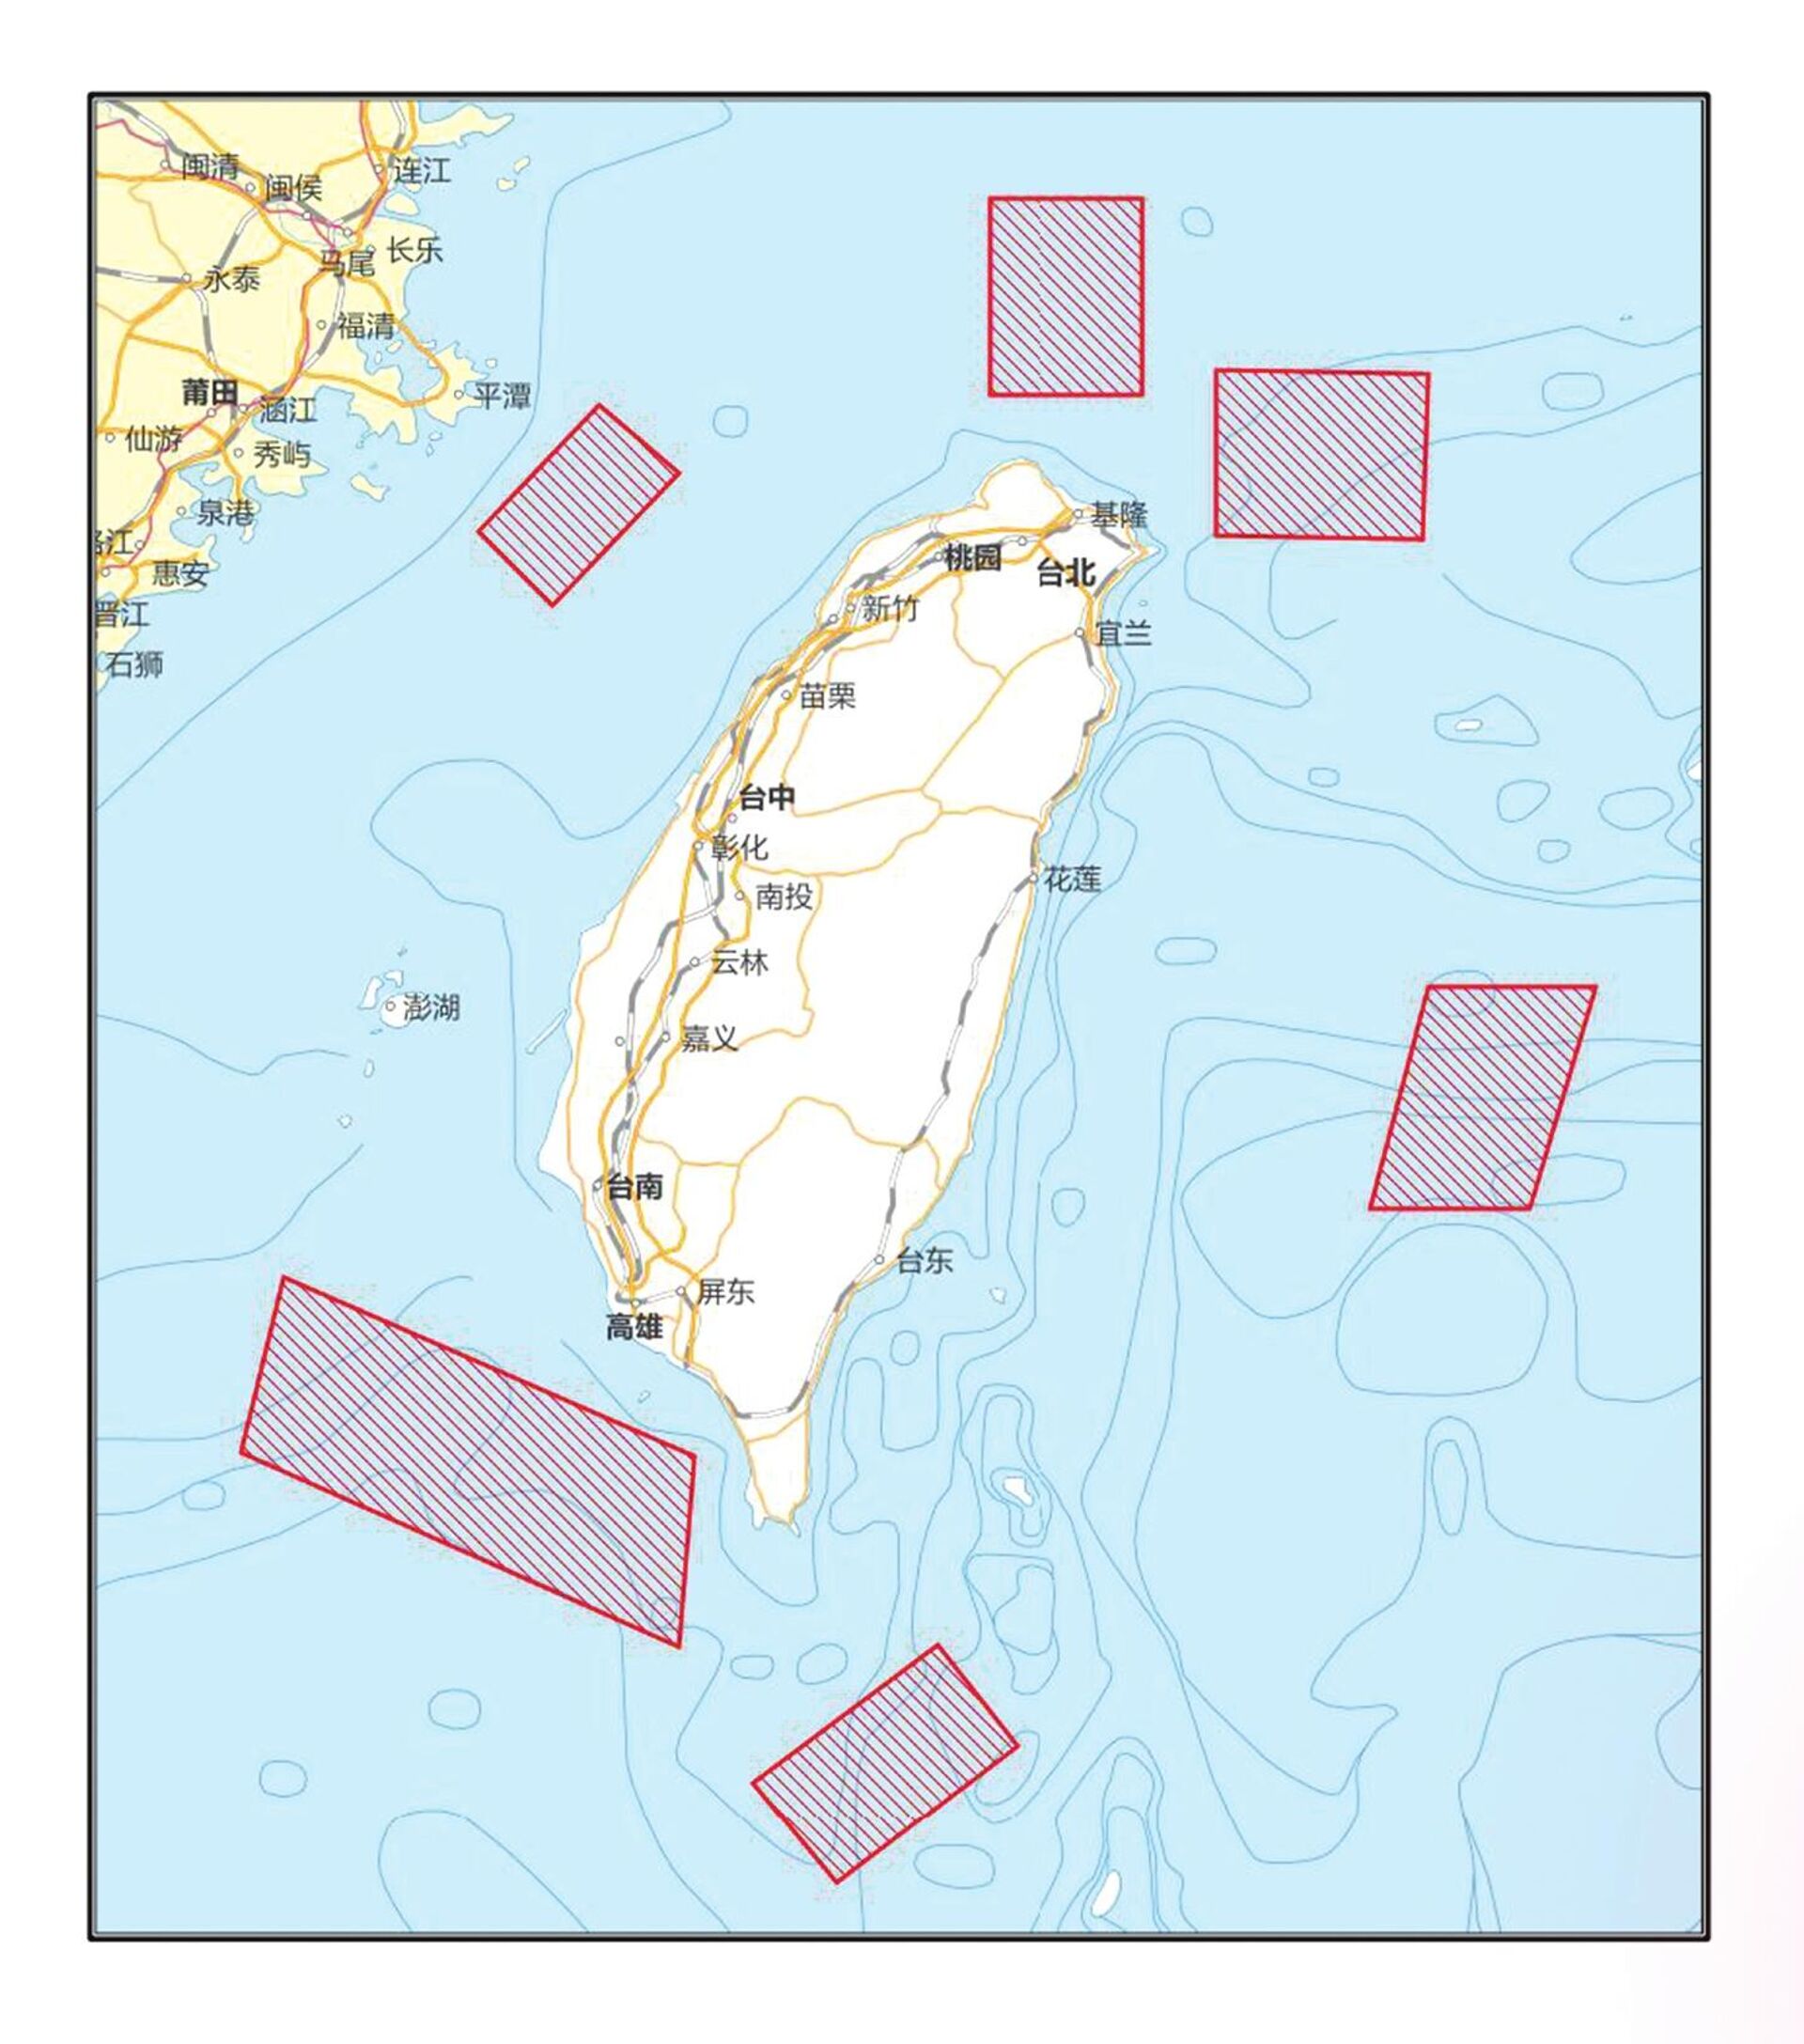 A sketch map shows the six regions where the People's Liberation Army will conduct important military exercises and training activities including live-fire drills surrounding the Taiwan island from August 4 to 7, 2022. - Sputnik International, 1920, 03.08.2022